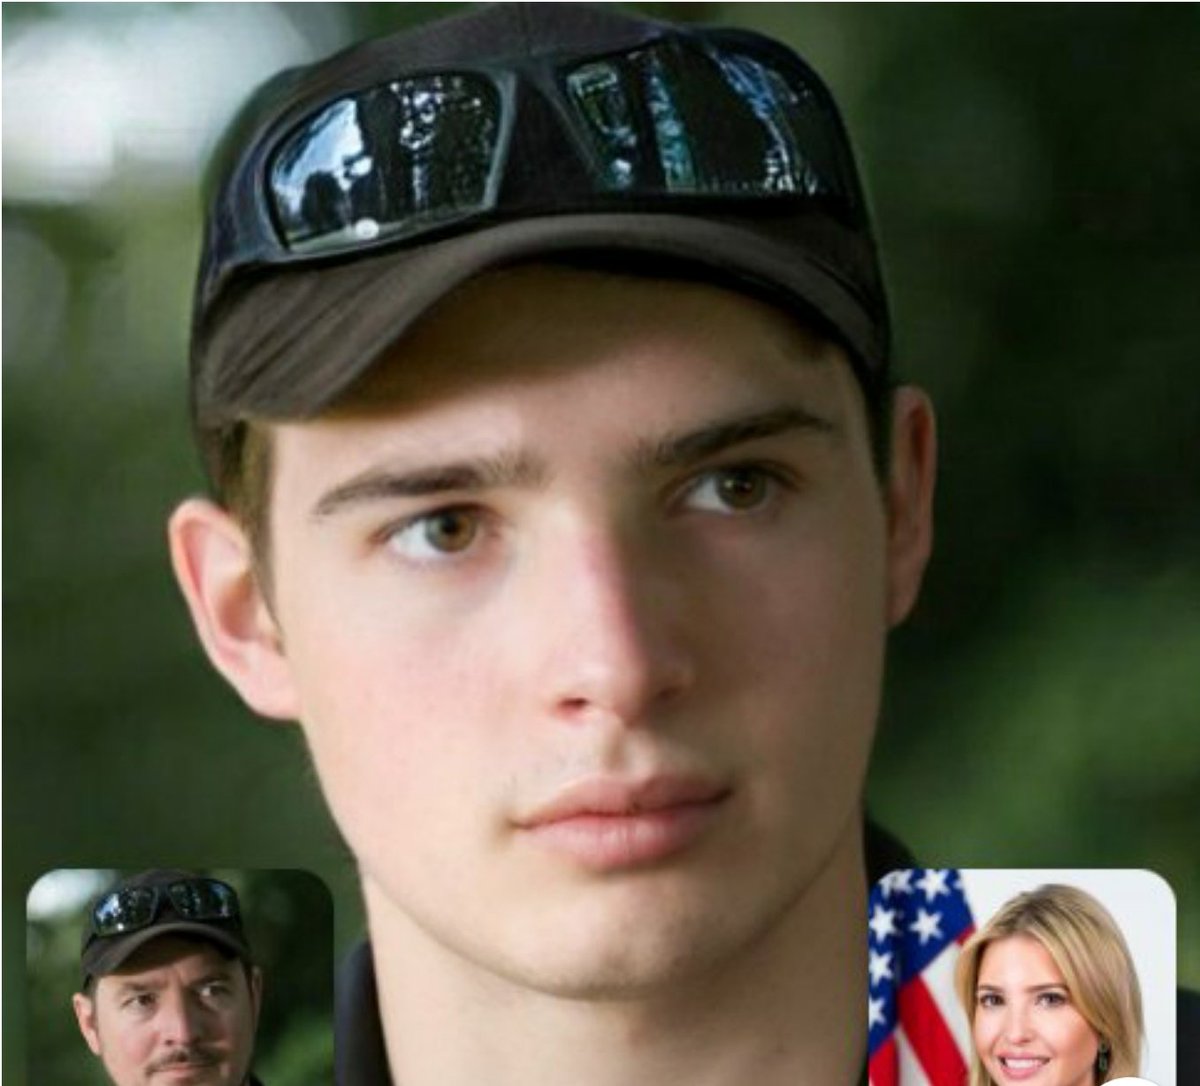 I regret to inform you that I have downloaded faceappI am drunk with power and cannot be stopped To start things off with a bang: Matt Parrott and Ivanka Trump's son